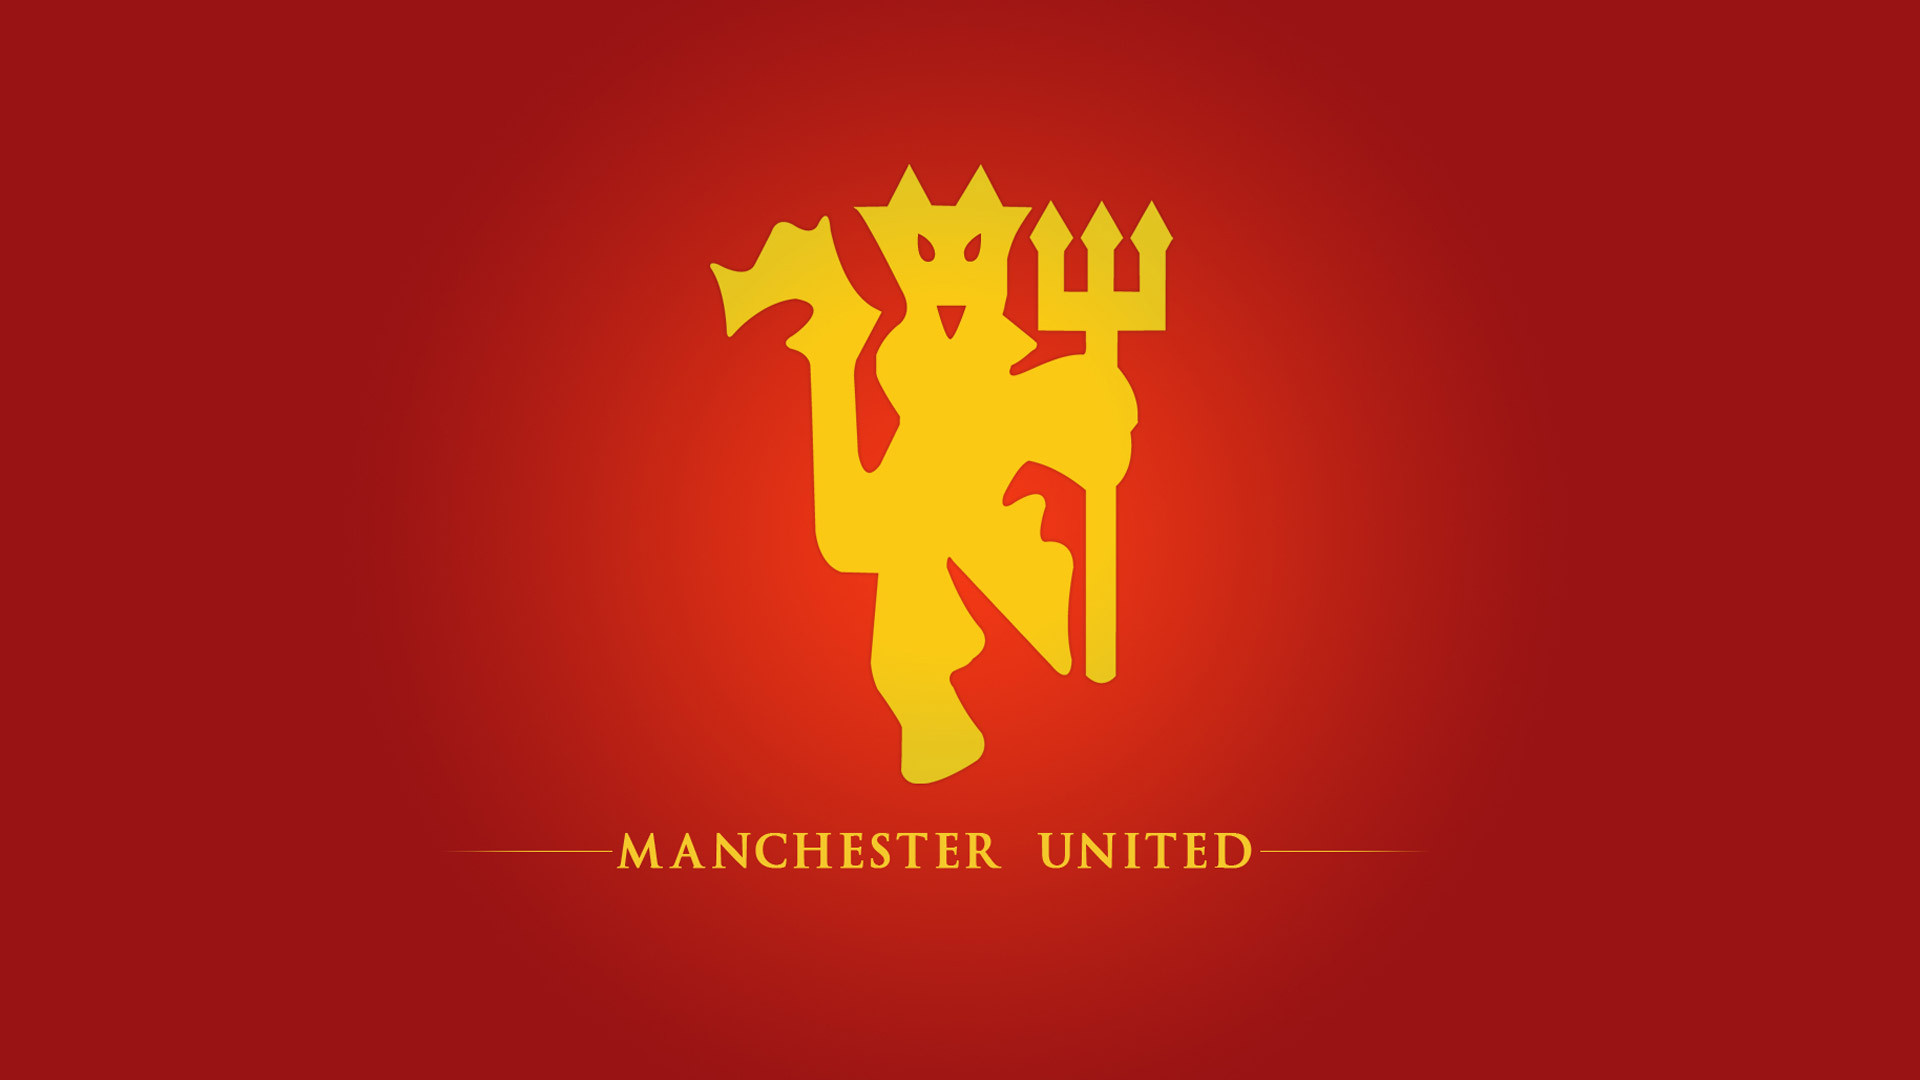 Free Download Manchester United Fc Football Logo Hd Wallpaper